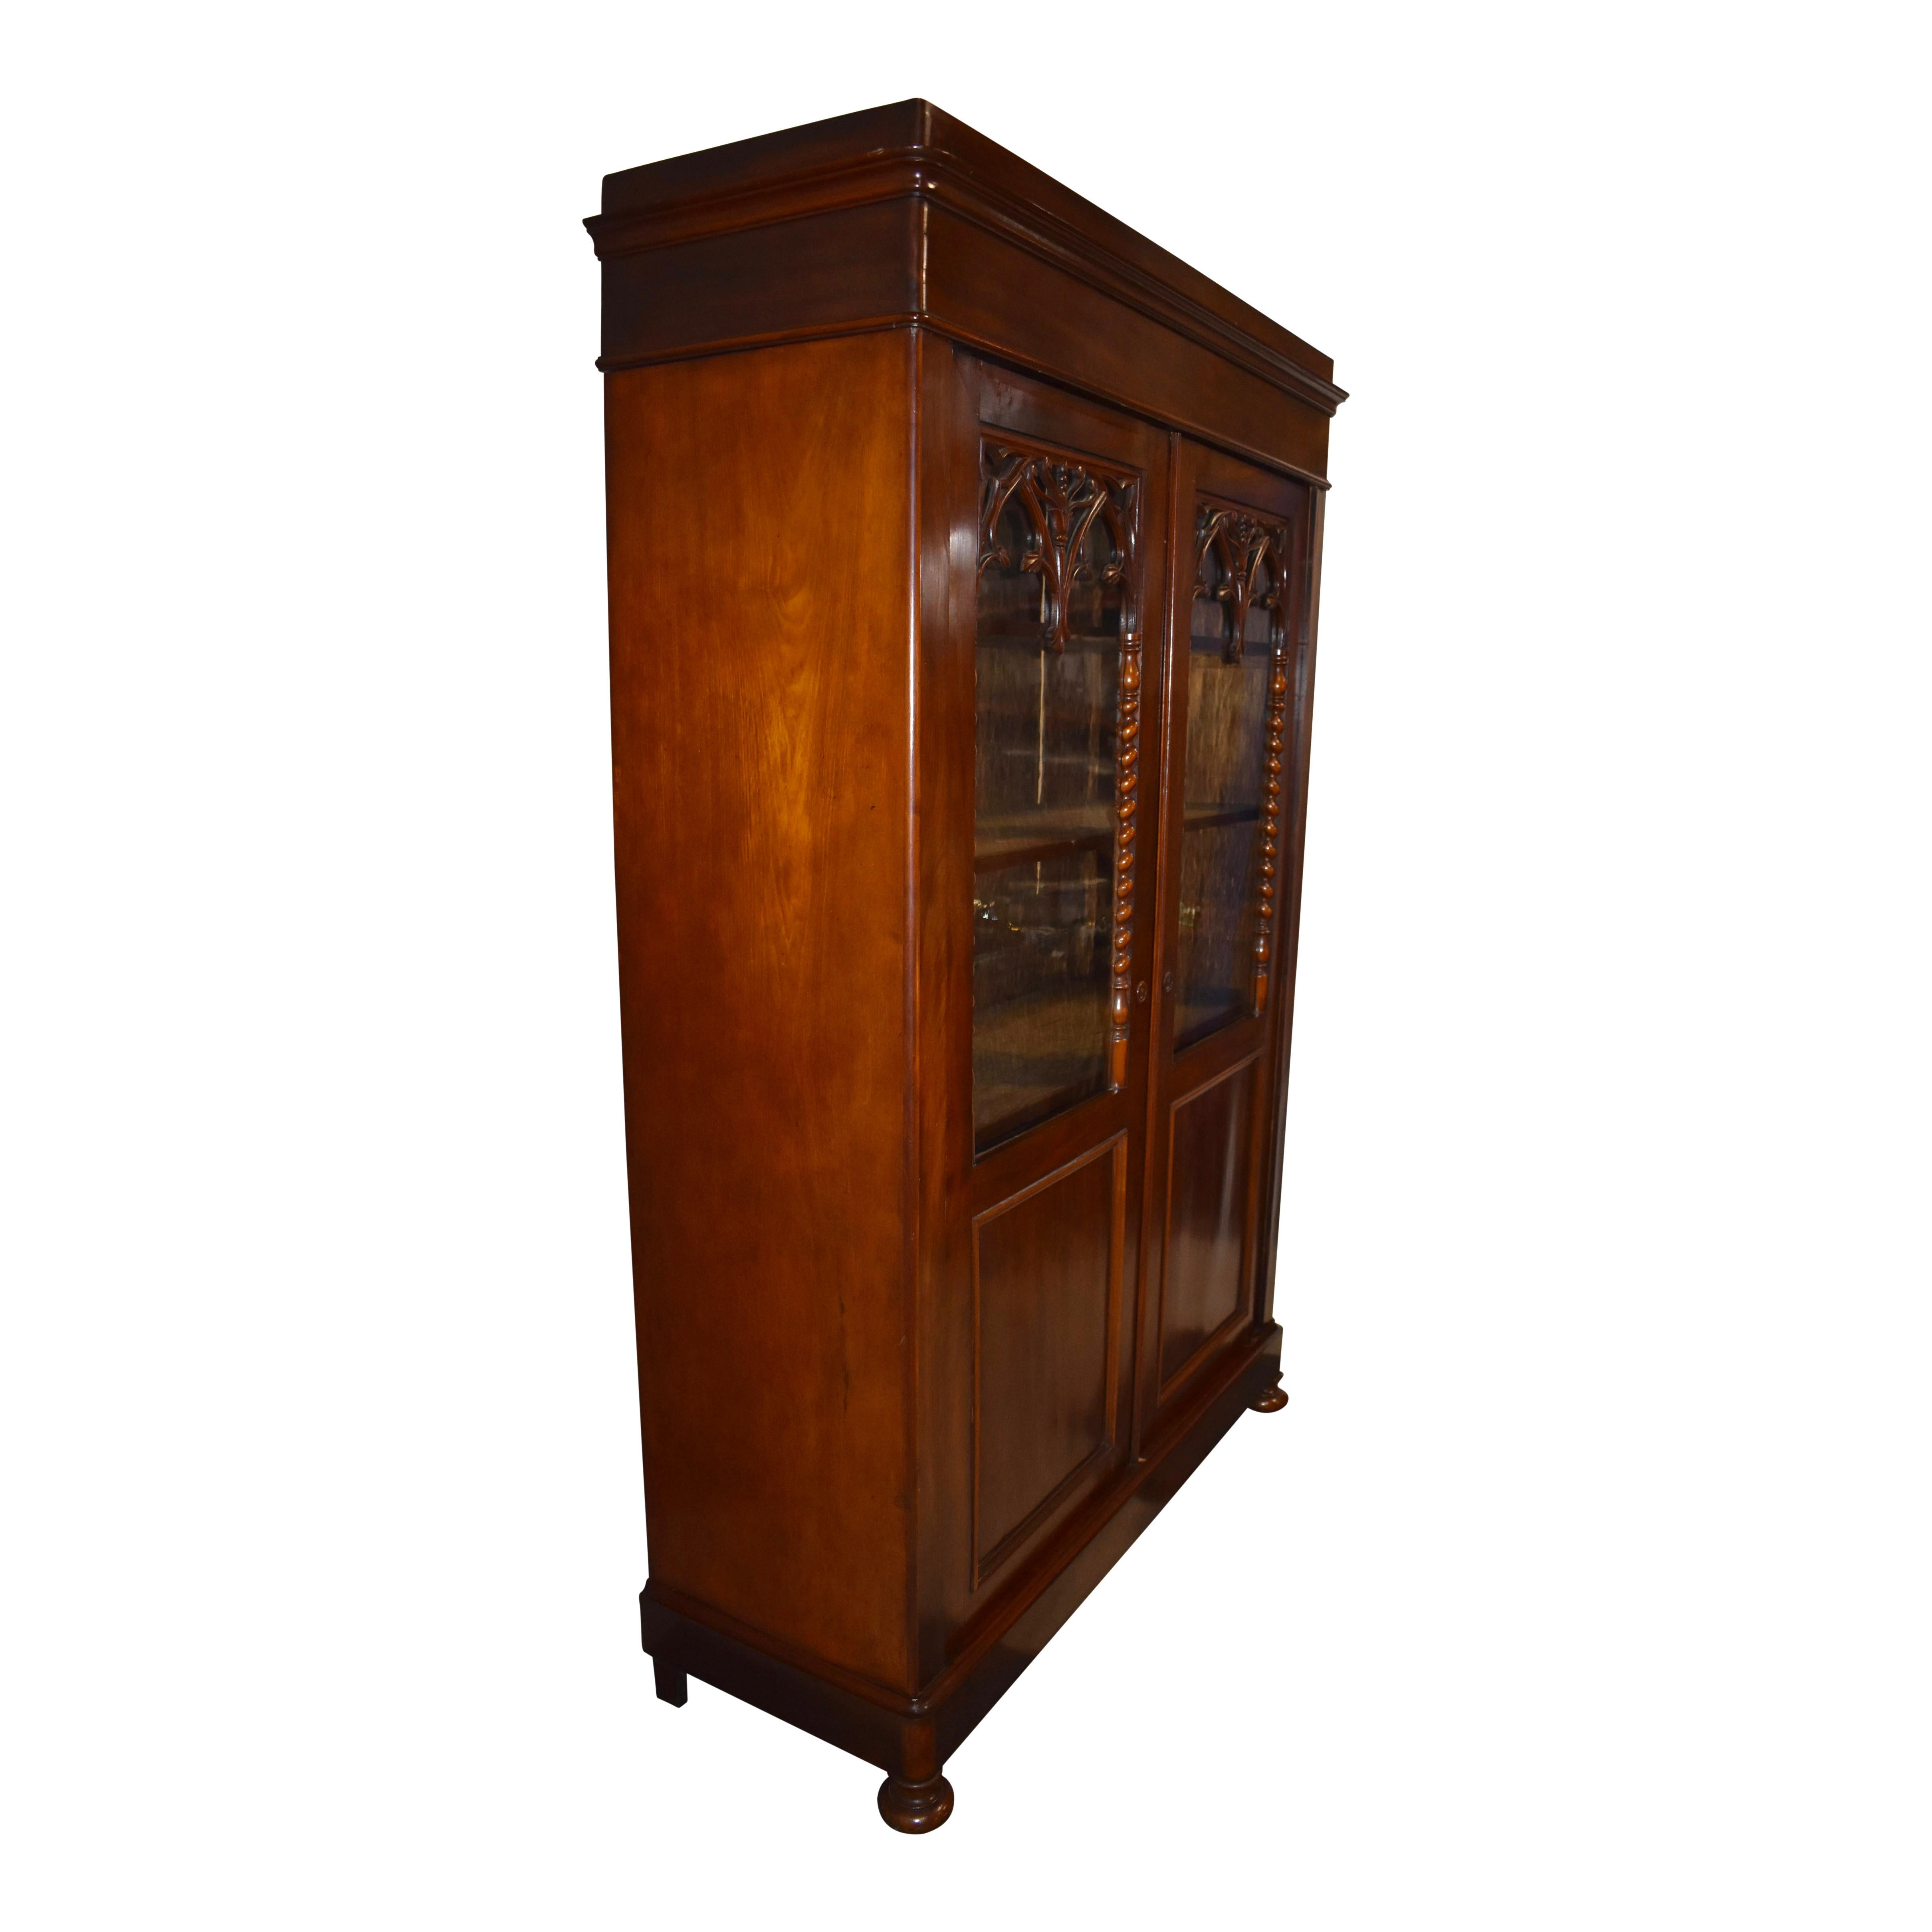 Crafted from mahogany veneer and solid oak that have been finished in a rich, dark stain consistent with mahogany's reddish-brown tones, this antique vitrine from the turn of the 20th century features two doors with glass panes for showcasing your